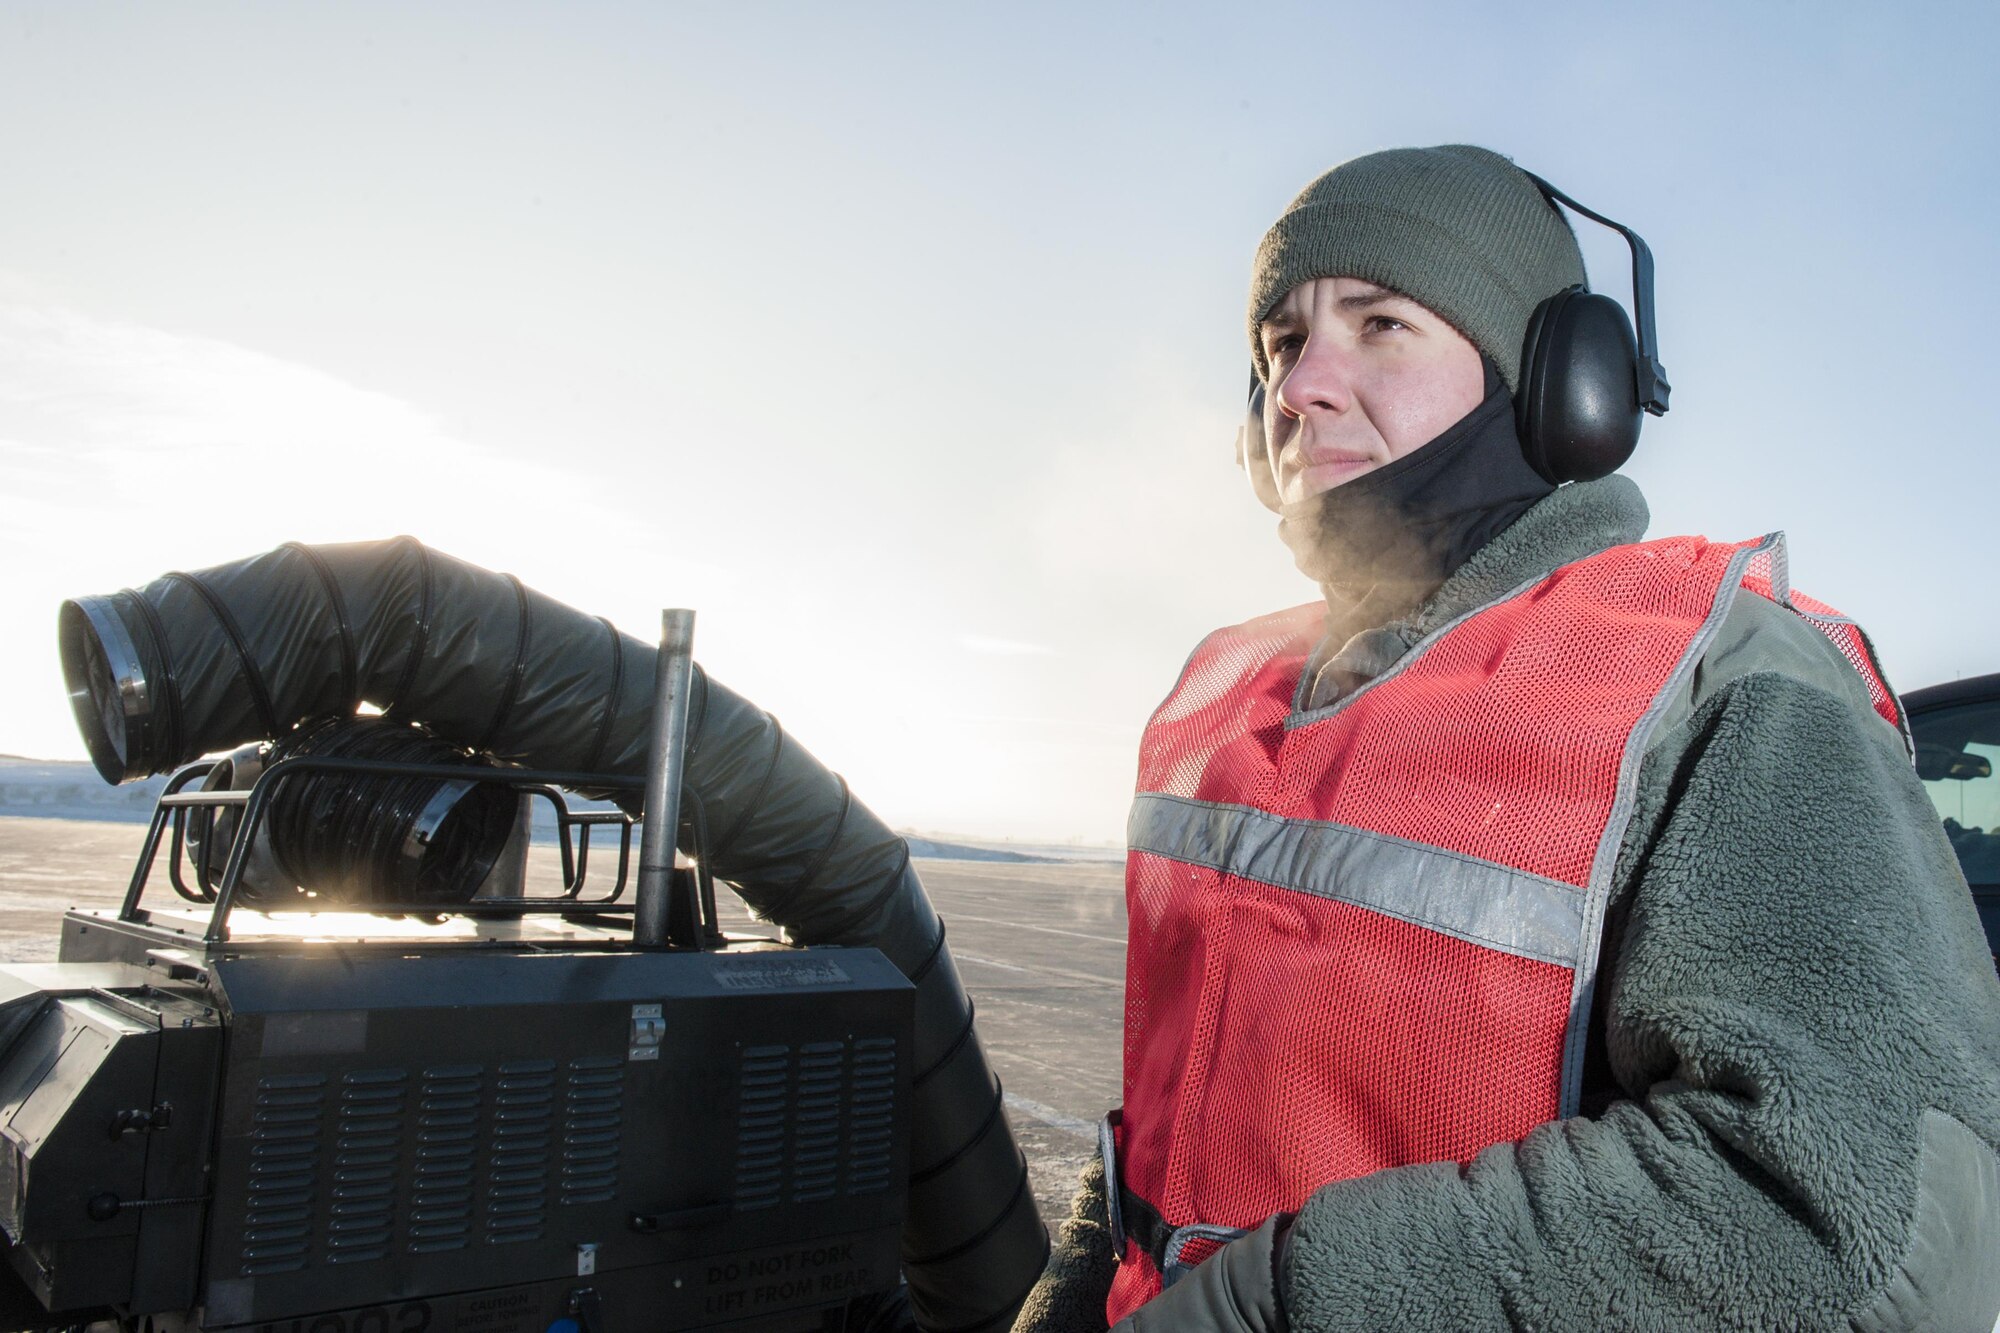 Senior Airman Daniel Hancock, 5th Aircraft Maintenance Squadron crew chief, watches at a B-52H Stratofortress starts its engines at Minot Air Force Base, N.D., Jan. 26, 2017. Hancock, along with other 5th AMXS Airmen, work in harsh weather conditions to provide B-52 firepower on demand. (U.S. Air Force photo/Senior Airman J.T. Armstrong)